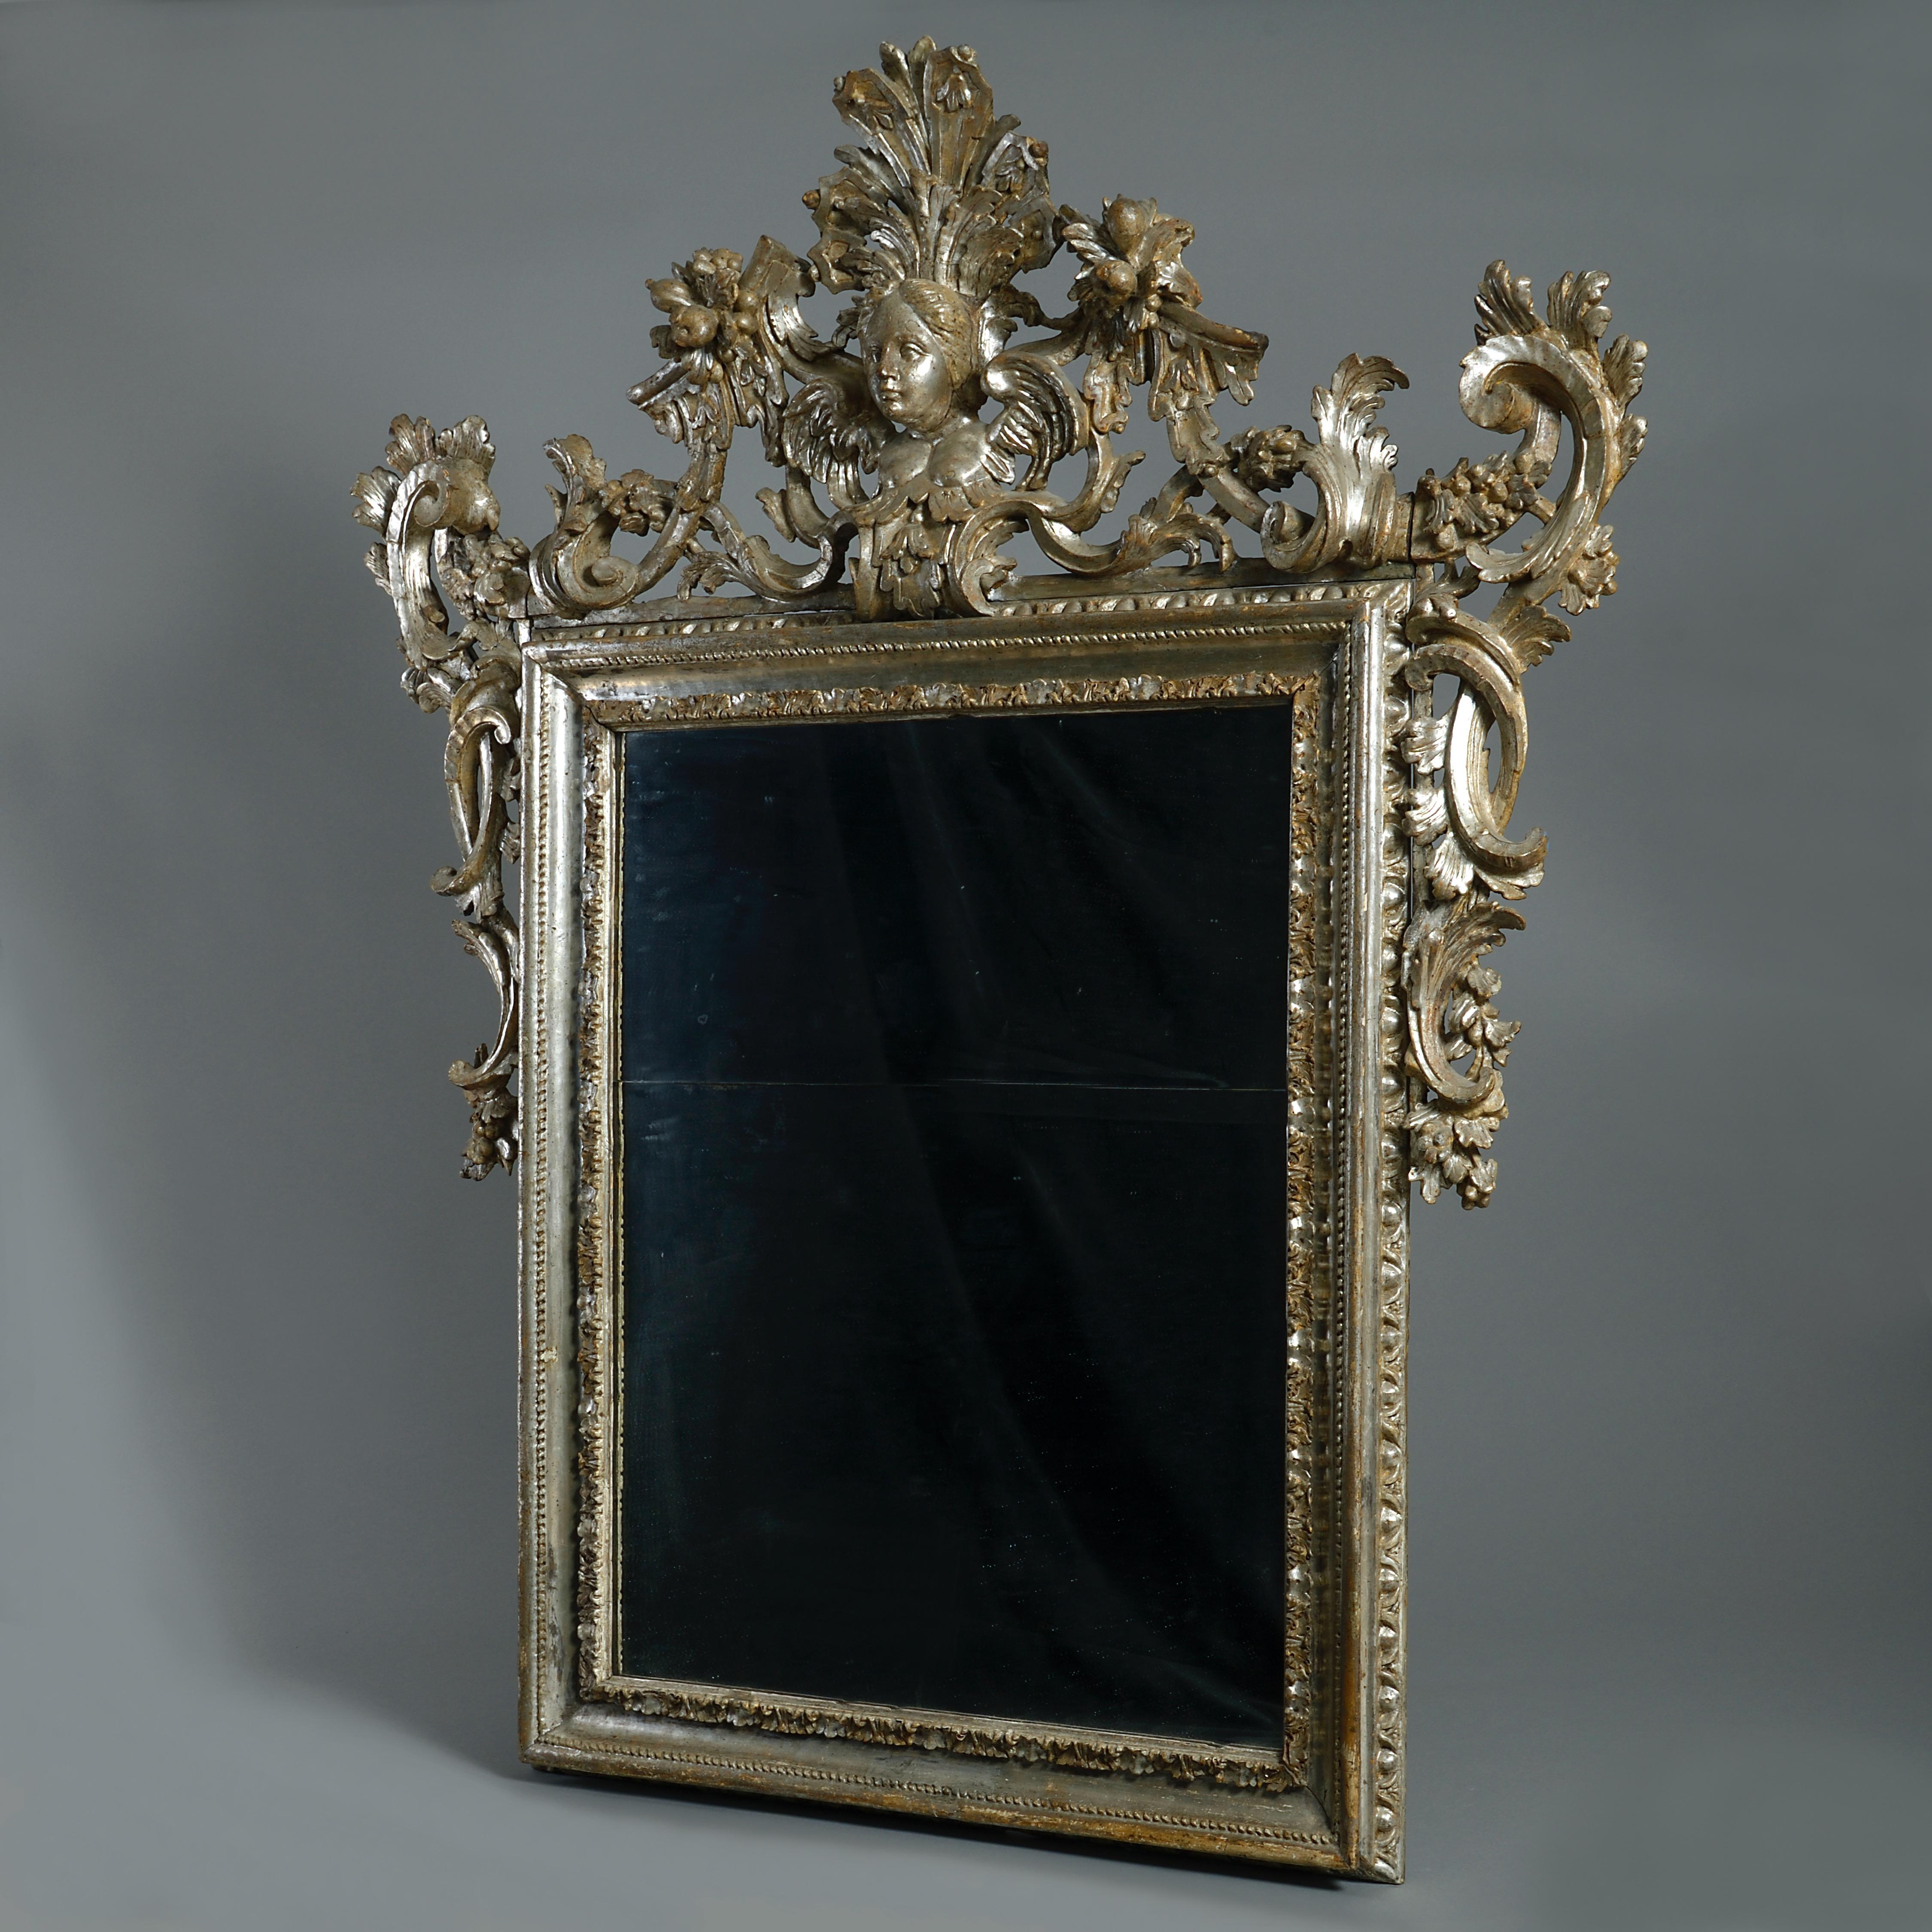 A fine southern Italian silvered wood mirror, Naples or Sicily, circa 1730.